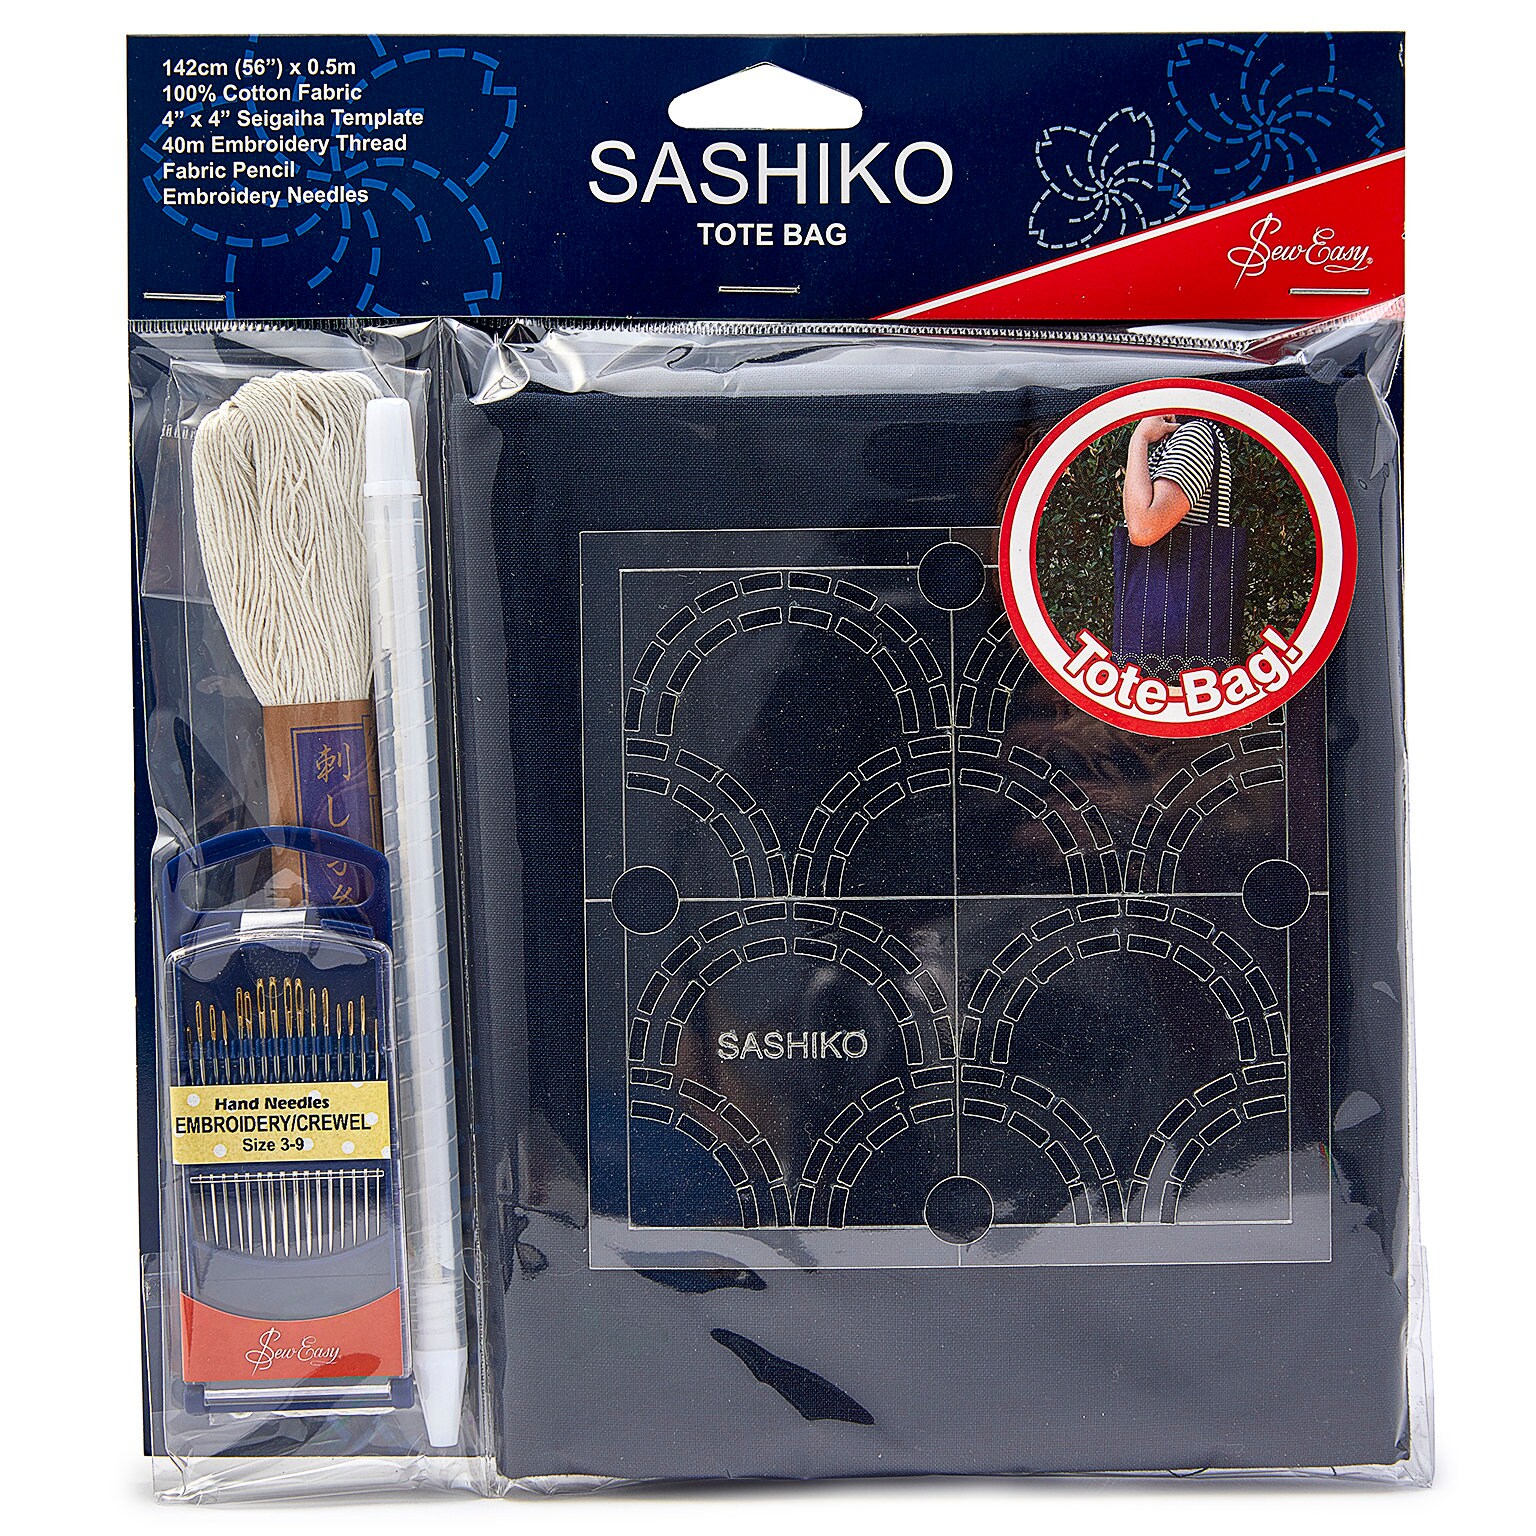 Sewing Kit Small Beginner Set W/multicolor Thread, Needles, Scissors,  Thimble & Clips Emergency Repair by Fablise Craft 